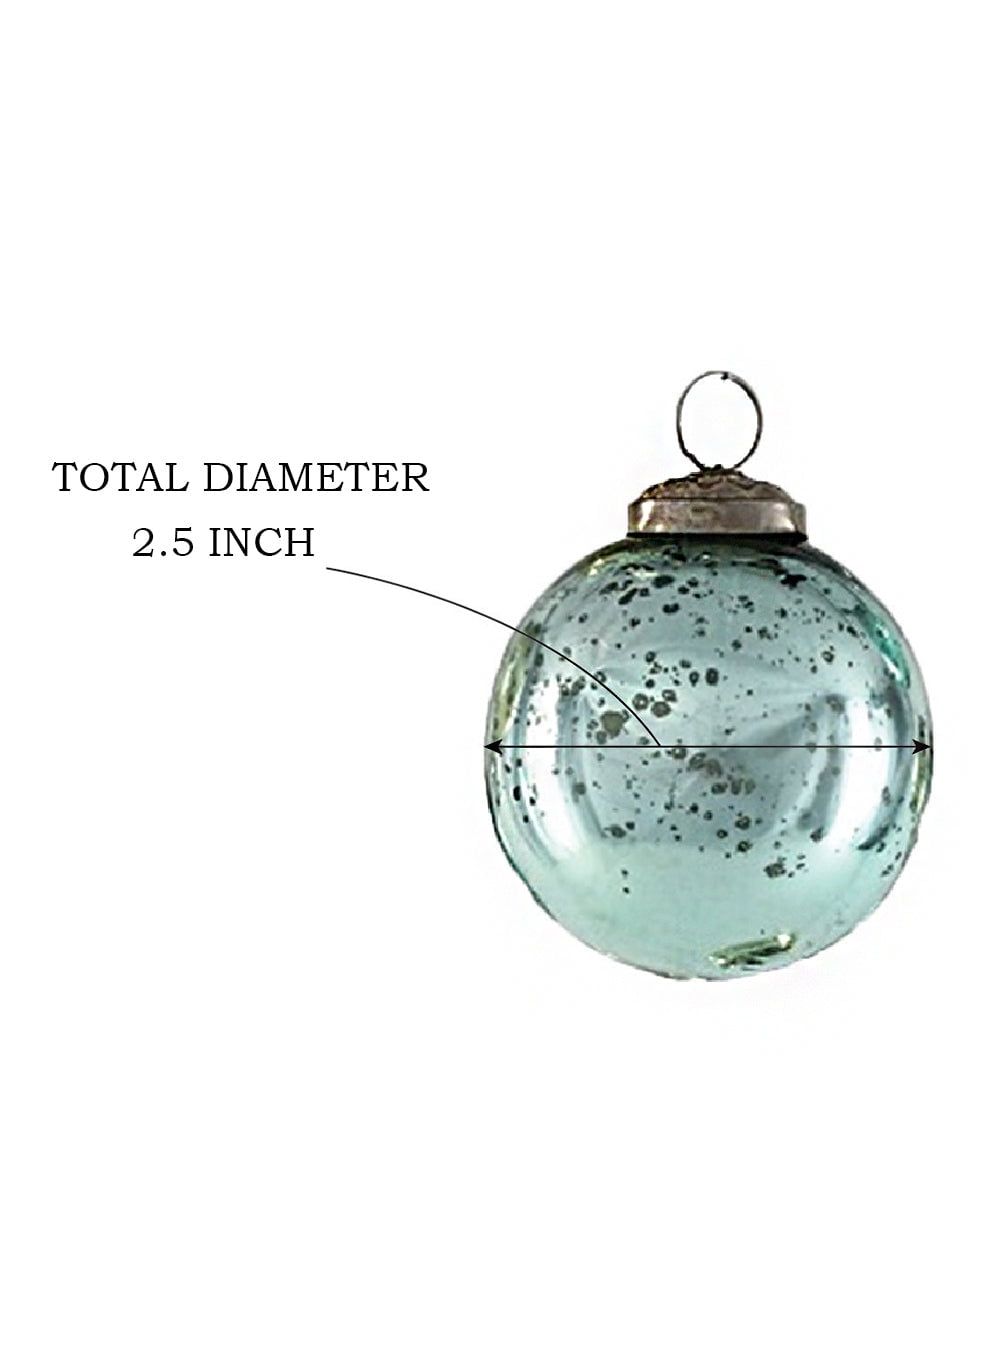 Serene Spaces Living Clear/ Silver Glass Ornament Ball for Christmas, 3 inch Dia, 3 inch Tall in 2 Styles